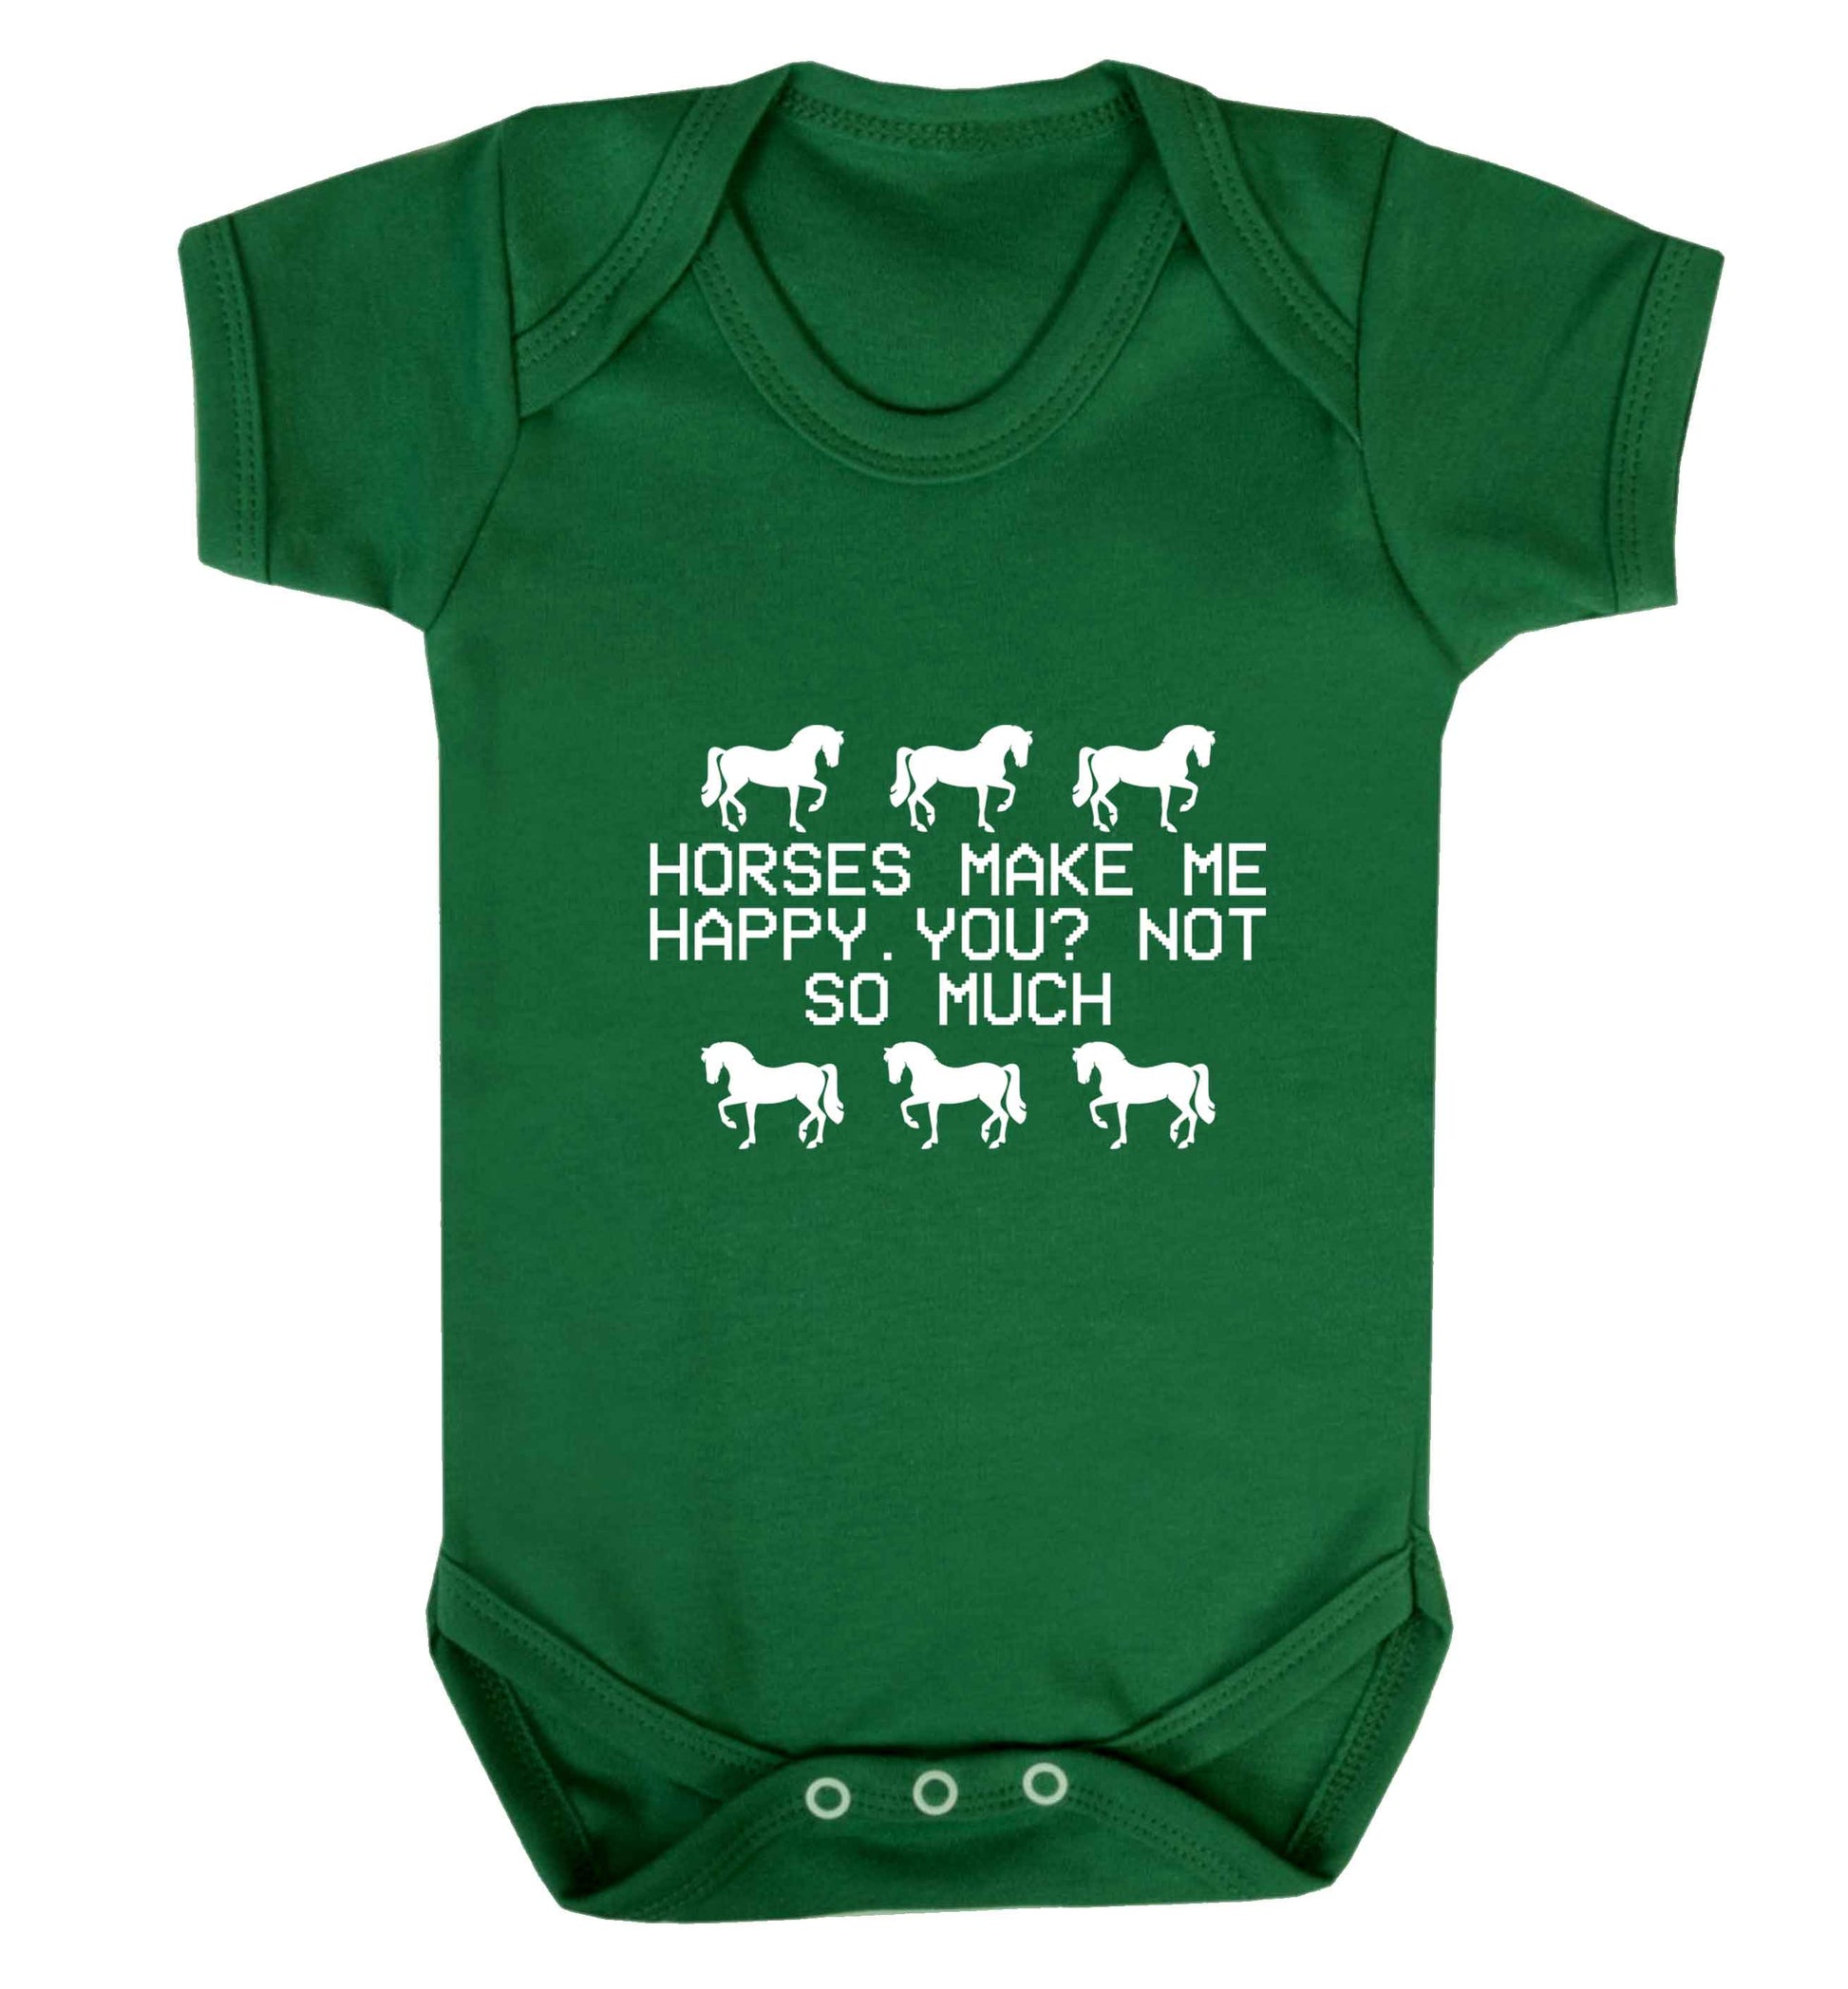 Horses make me happy, you not so much baby vest green 18-24 months